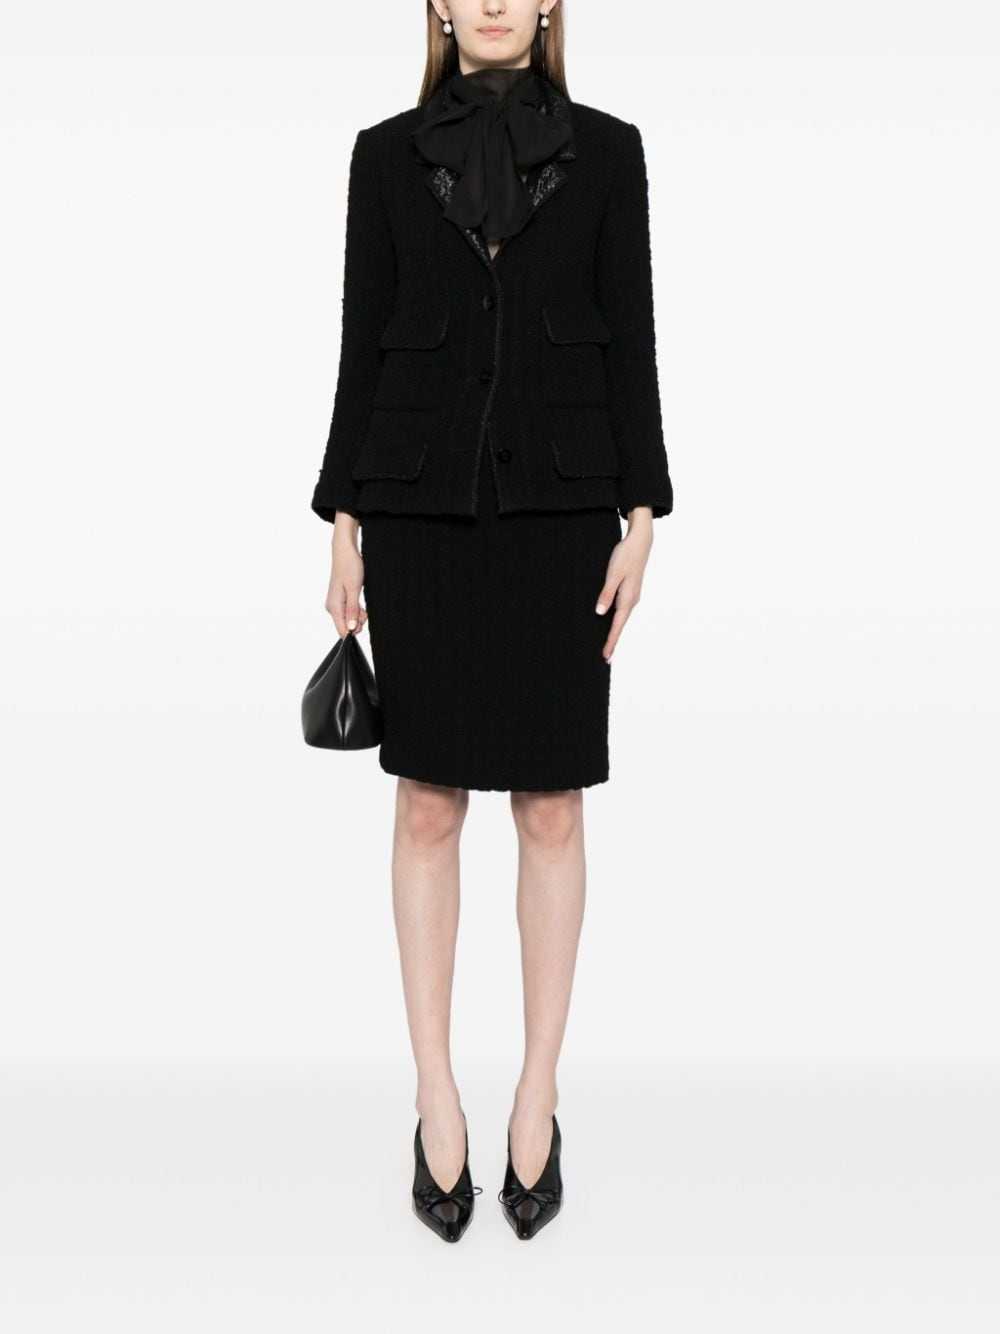 CHANEL Pre-Owned 1998 textured skirt suit - Black - image 2